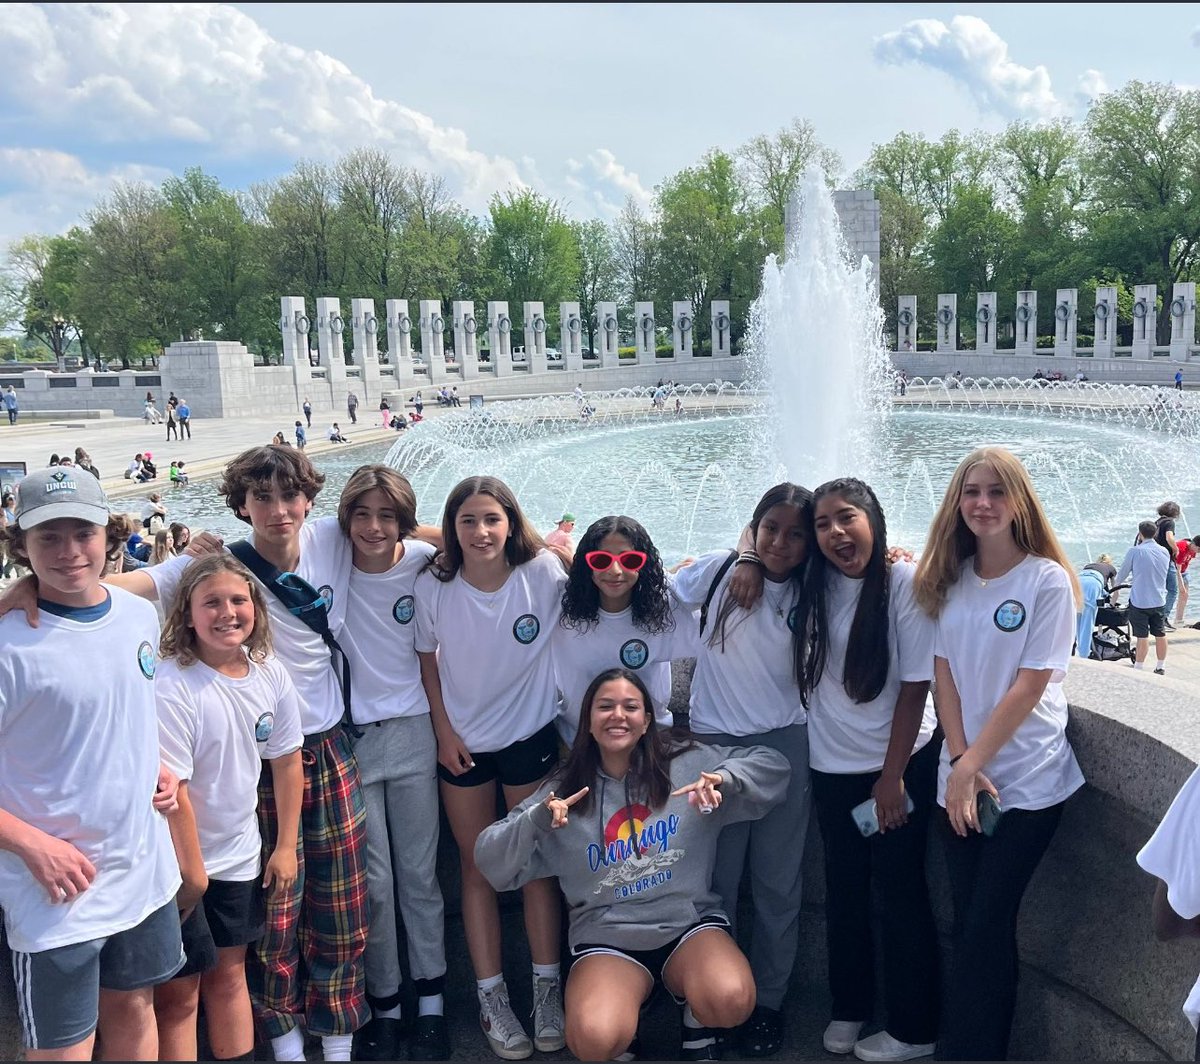 Loved spending 3 days with 8th graders from @gregory_elem in WashingtonDC during their fieldtrip. Memories that will stay in my ♥️ forever.
Thanks @deleondolphin22 for helping us make this trip possible! 
@jkaybooth & MsSeidl, I admire your incredible hard work. @NewHanoverCoSch